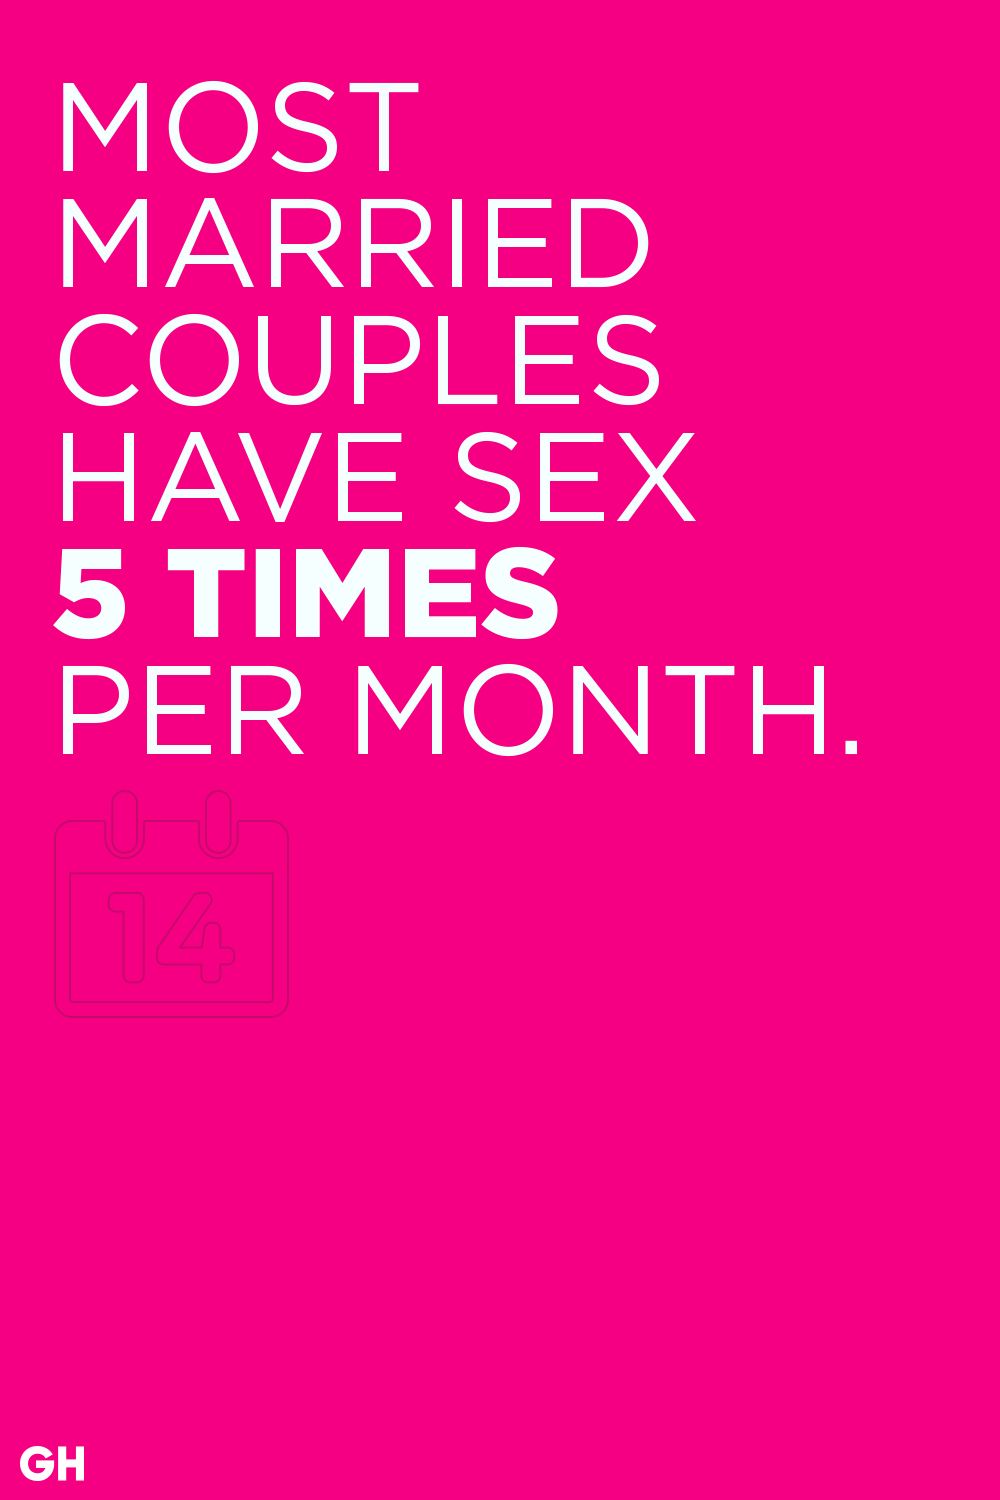 10 Surprising Statistics About Married image image